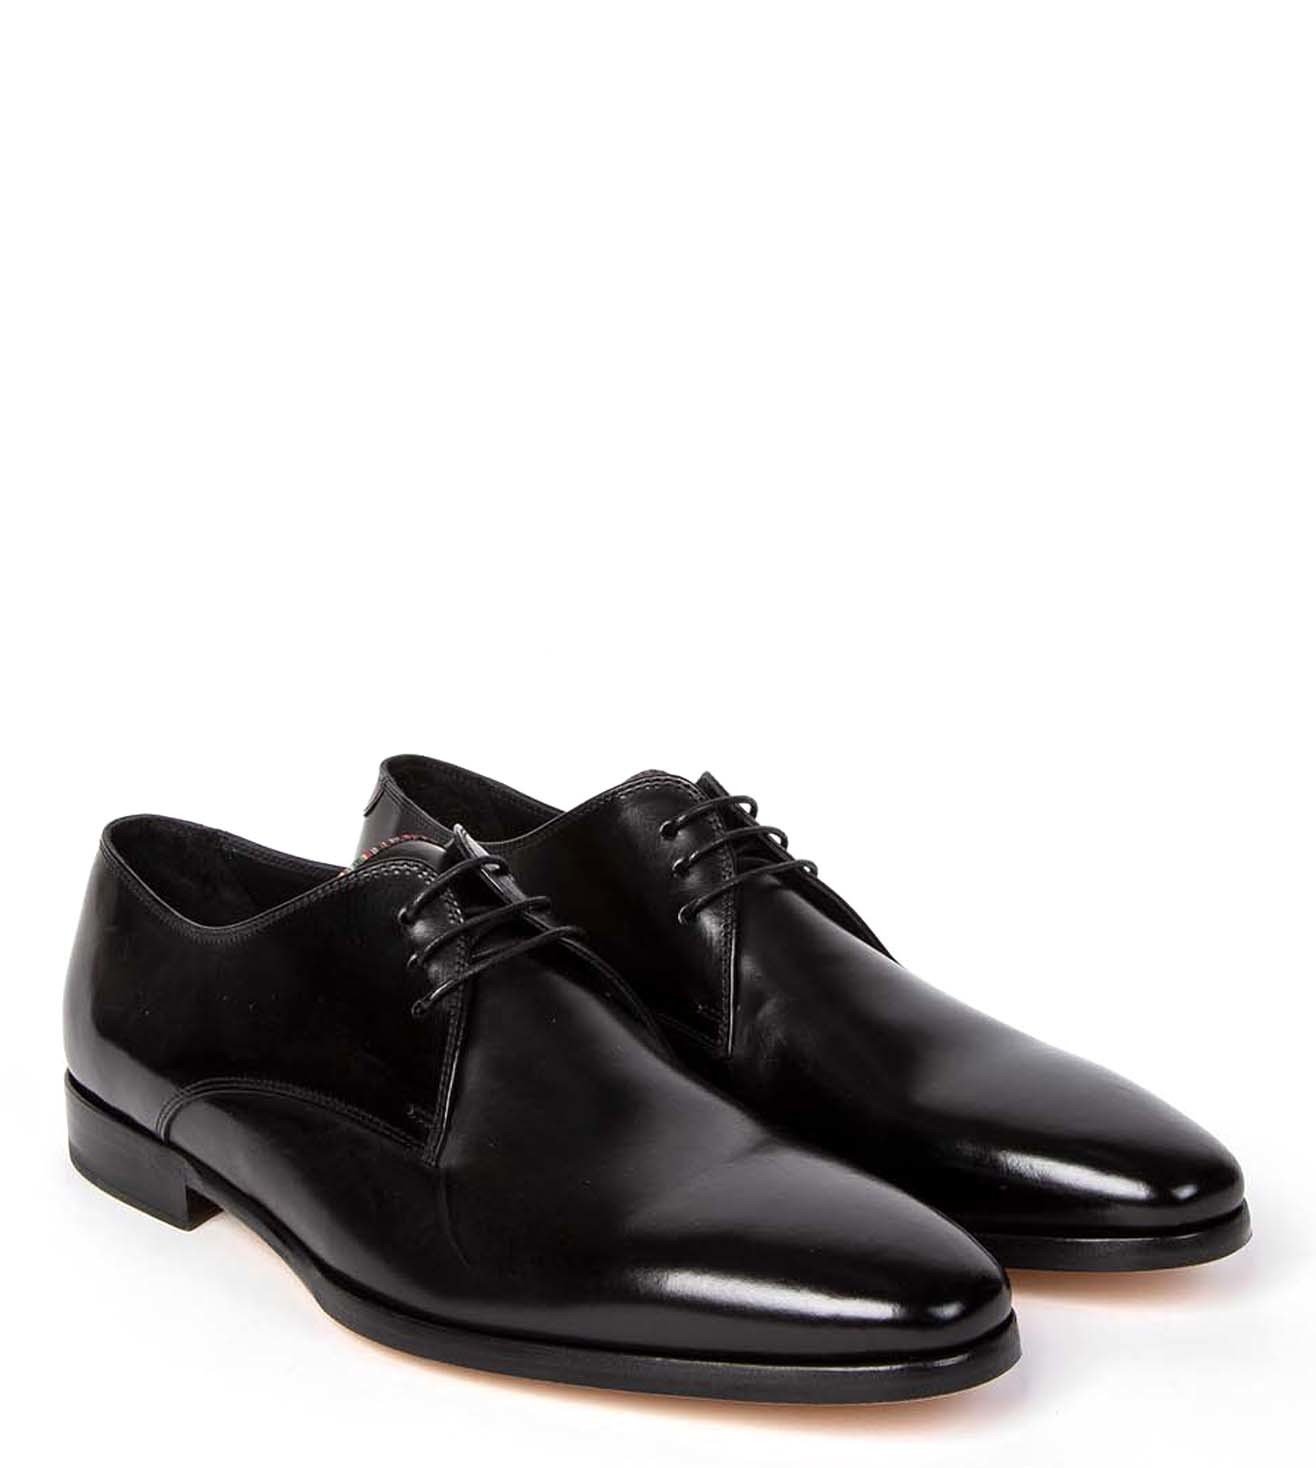 paul smith derby shoes